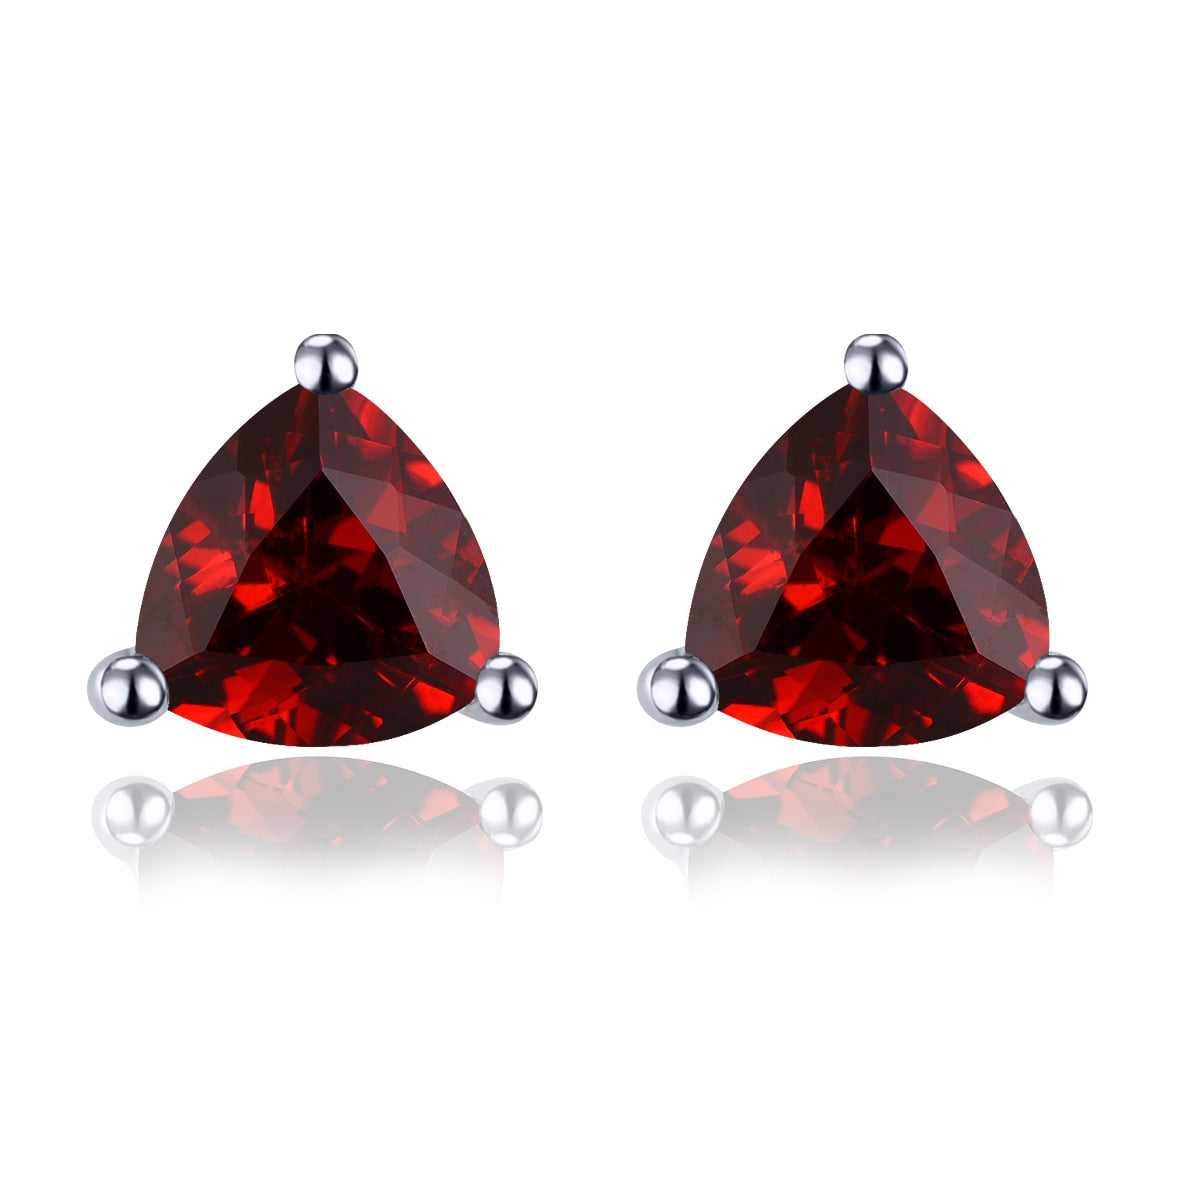 Natural Garnet Solid Sterling Silver Stud Earrings 1.8 Carats Genuine Gemstone Classic Simple Design Top Quality Jewelrys Natural Garnet